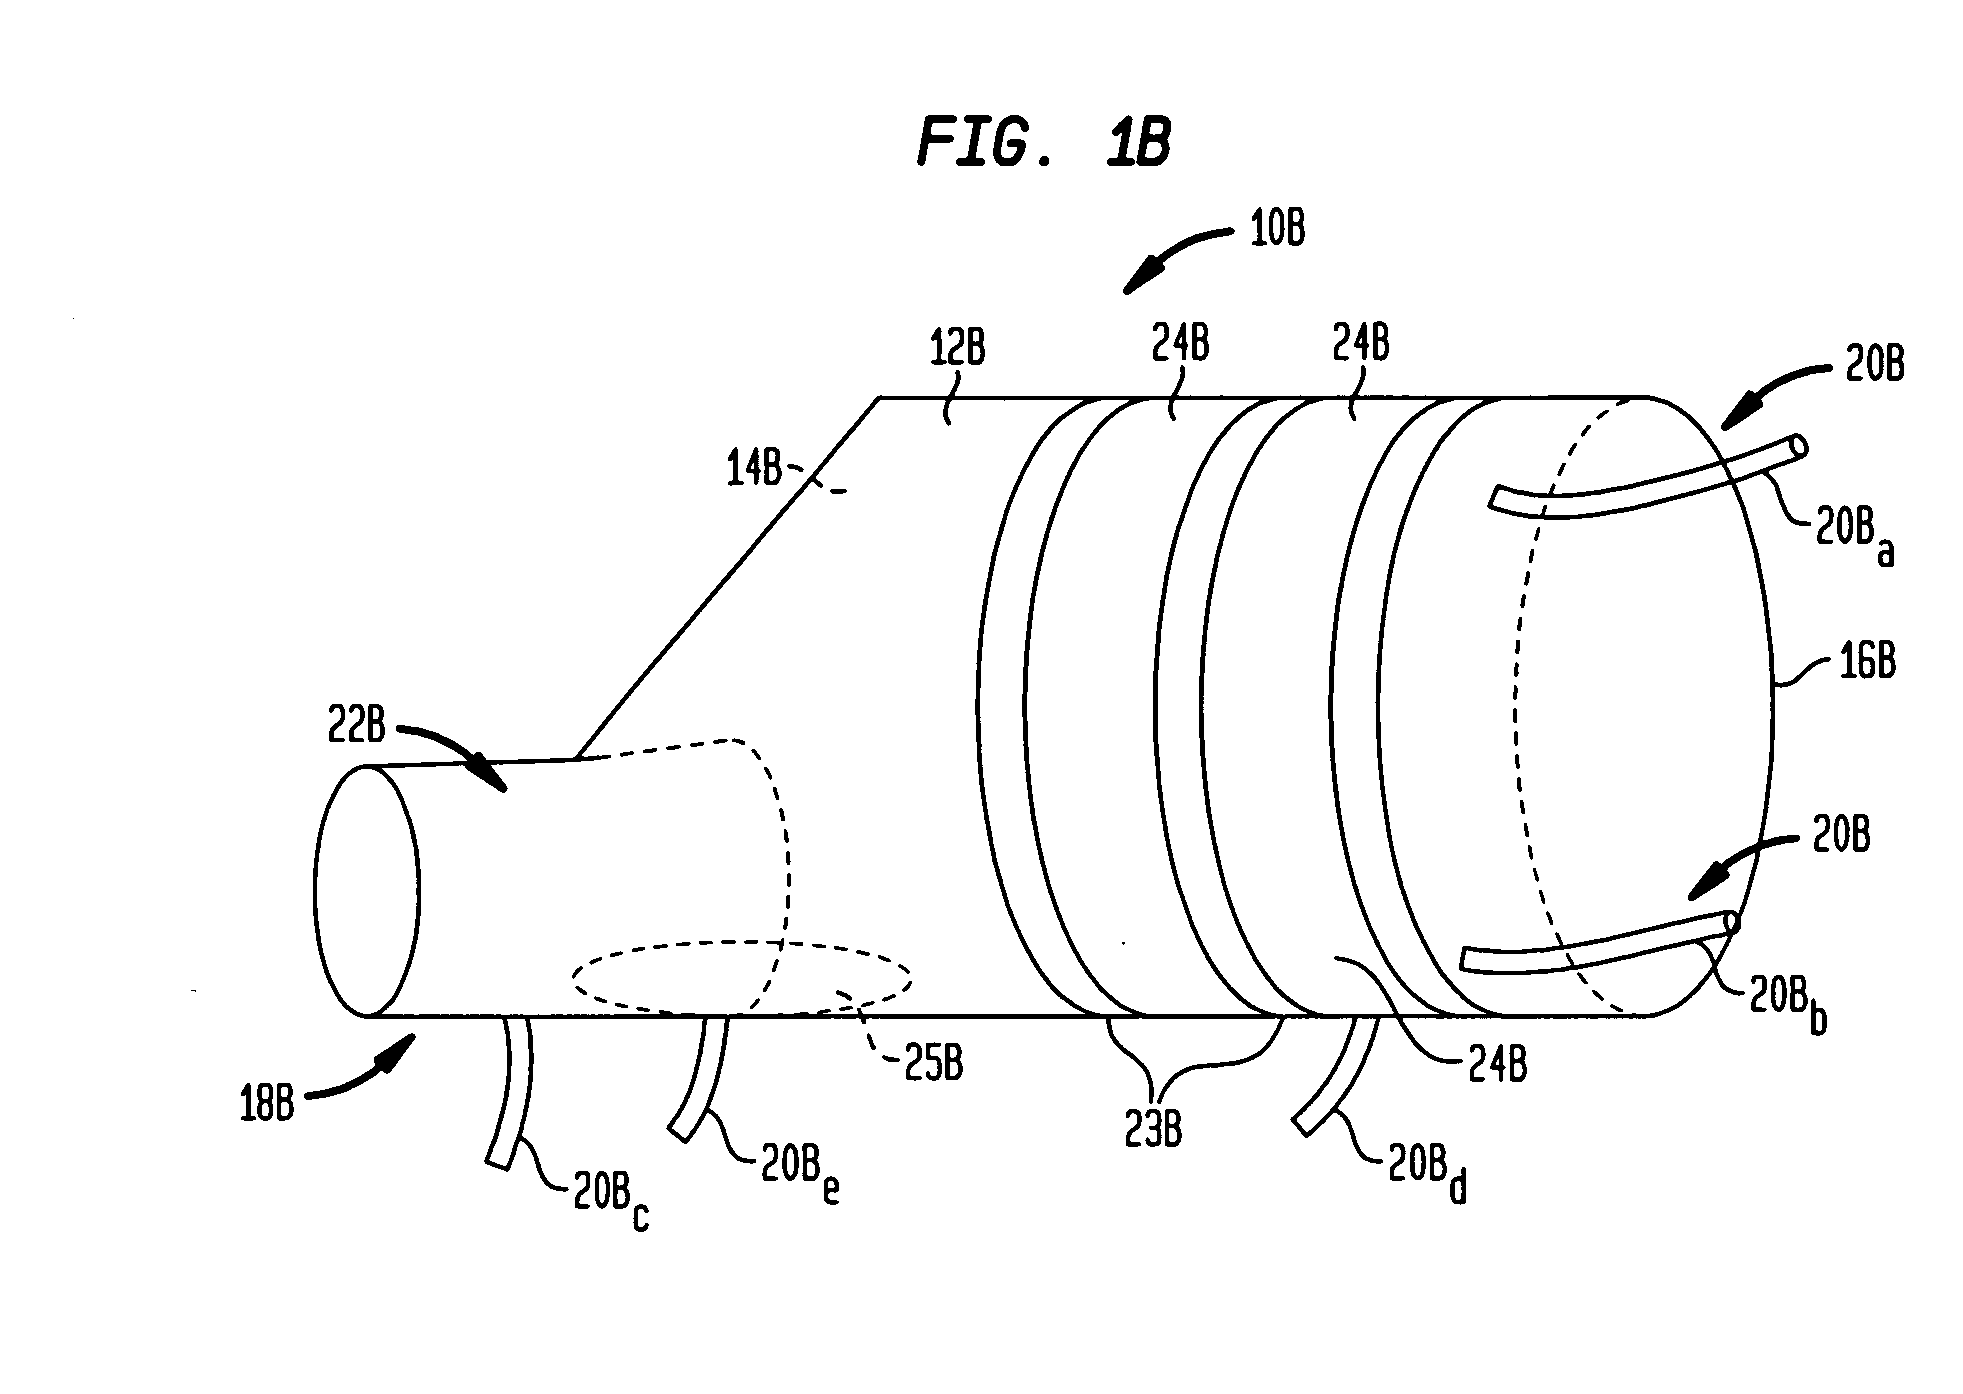 Access port for flexible wound treatment devices